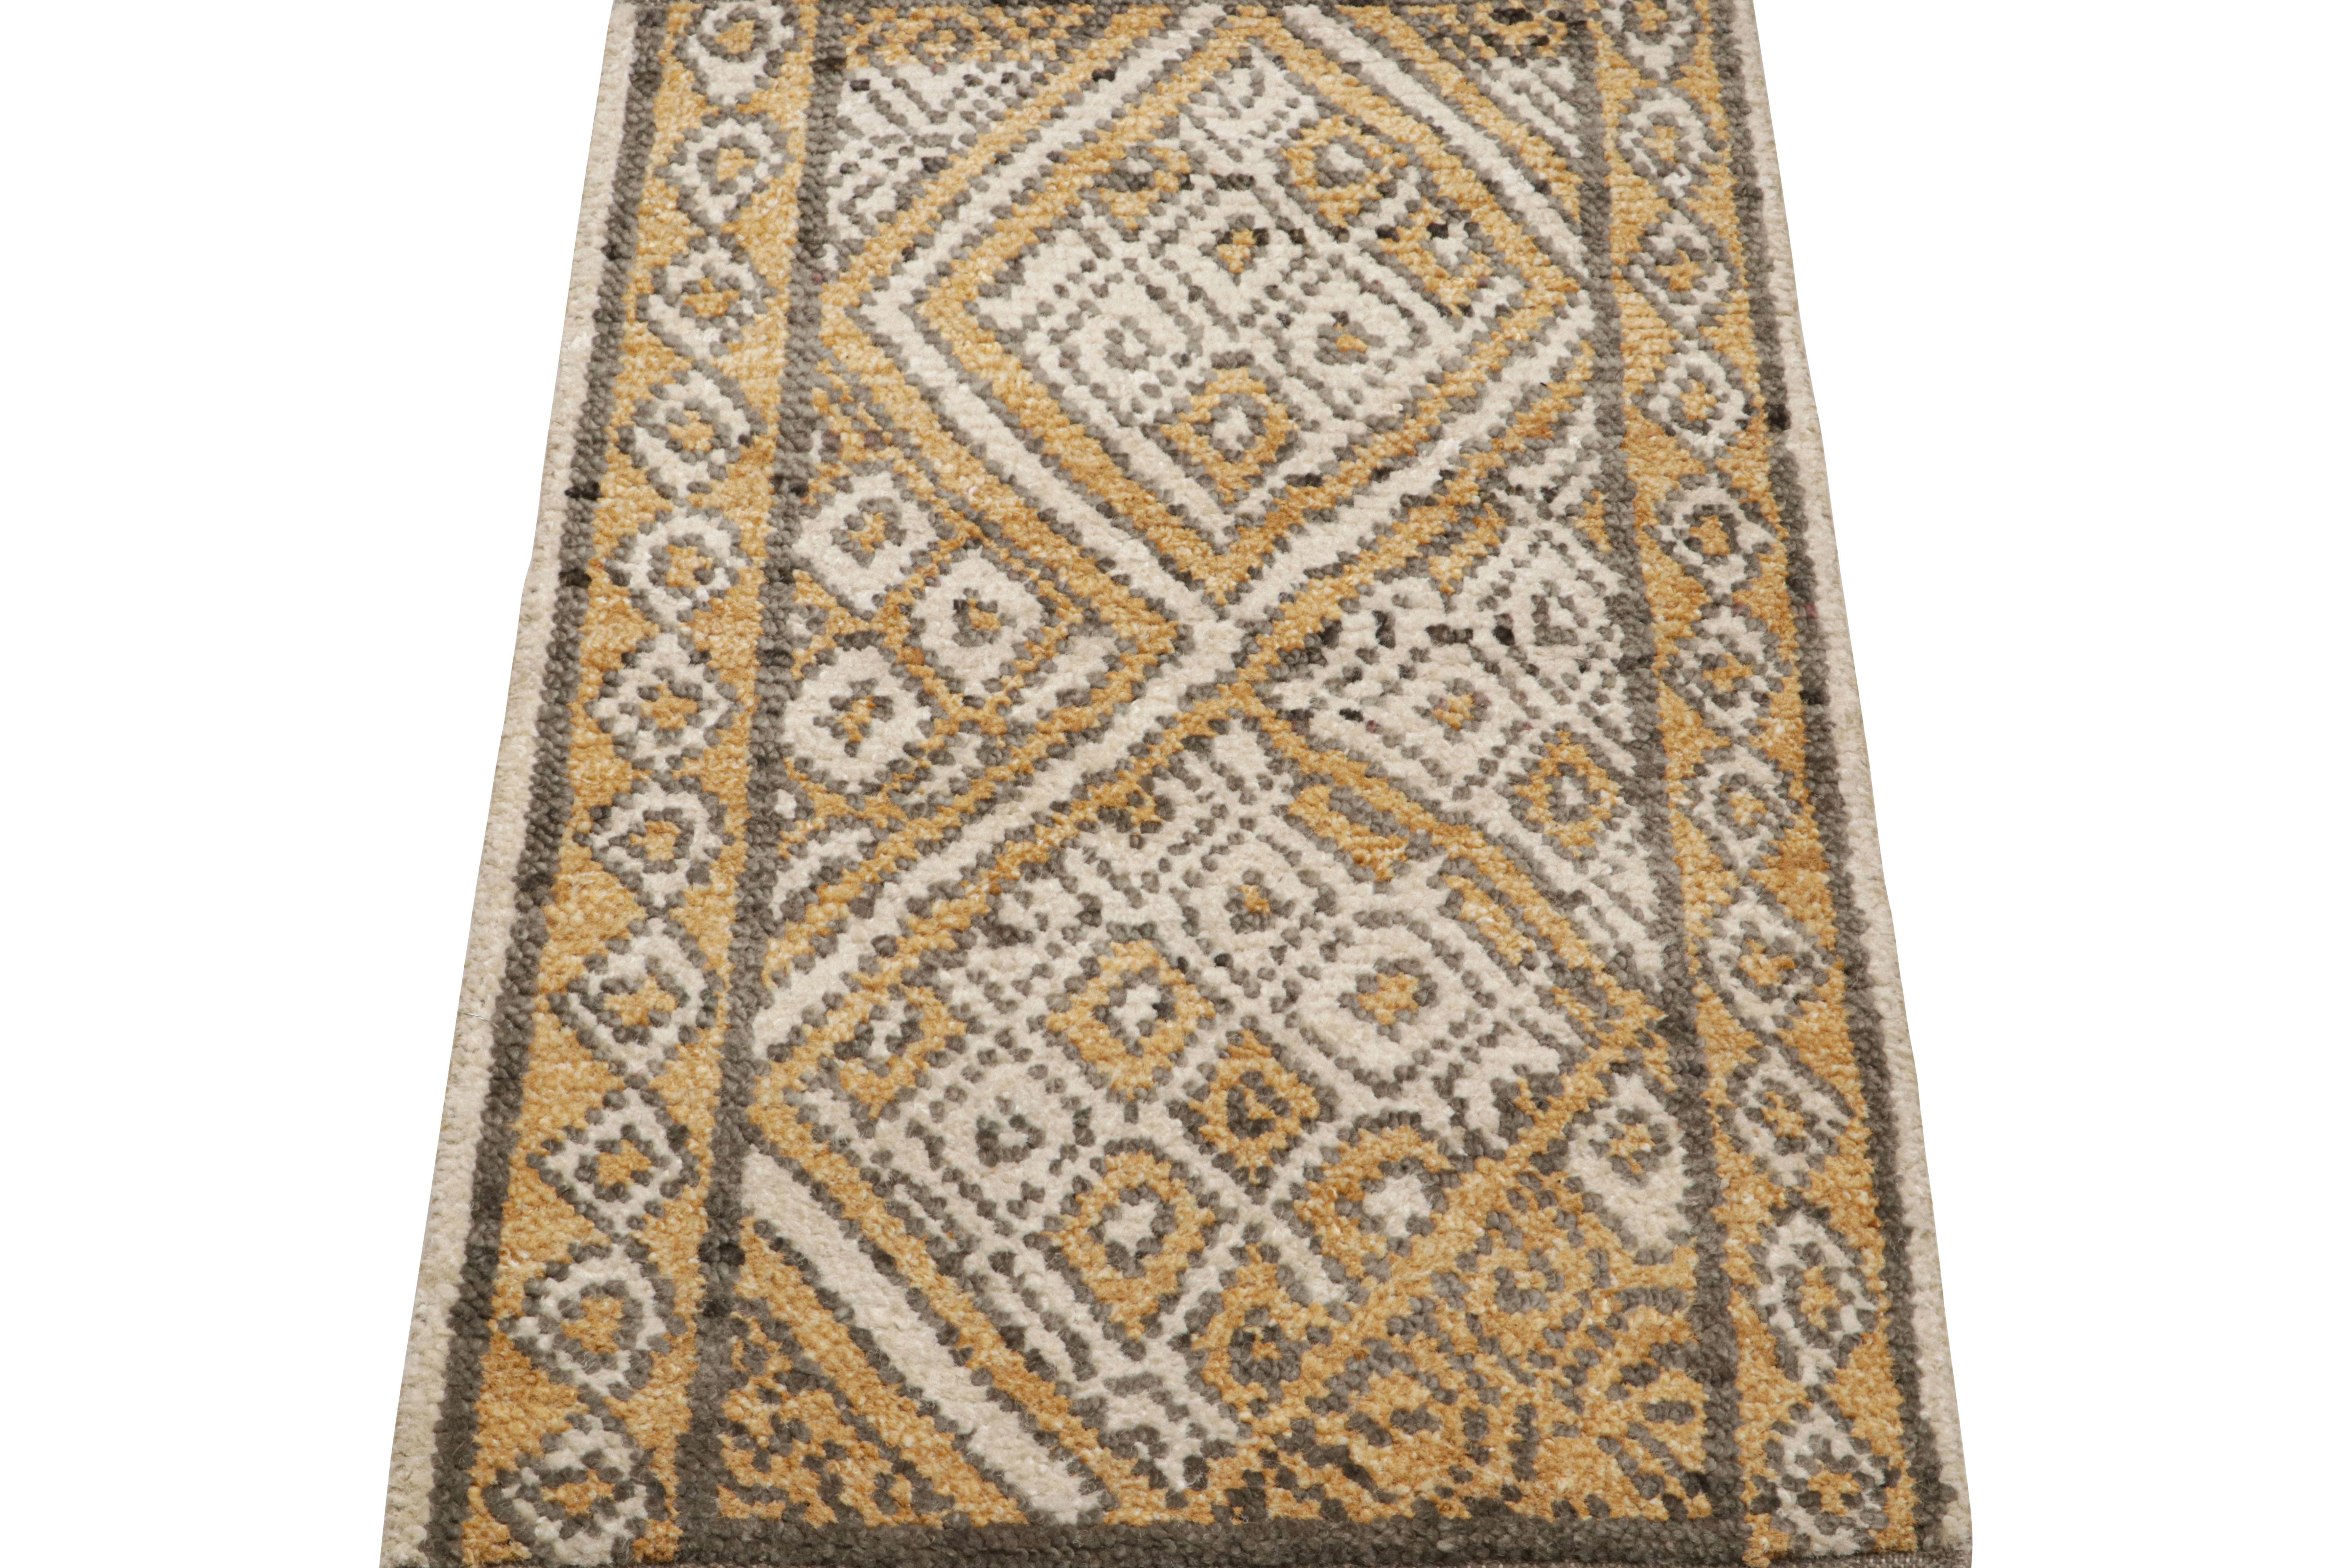 Hand-knotted in wool and silk, this 2x4 Moroccan rug features a ribbed texture inspired from Boucherouite-style pieces and similar textiles in the primitivist Berber tribal style 

On the Design: 

Connoisseurs may admire the subtle appeal of the